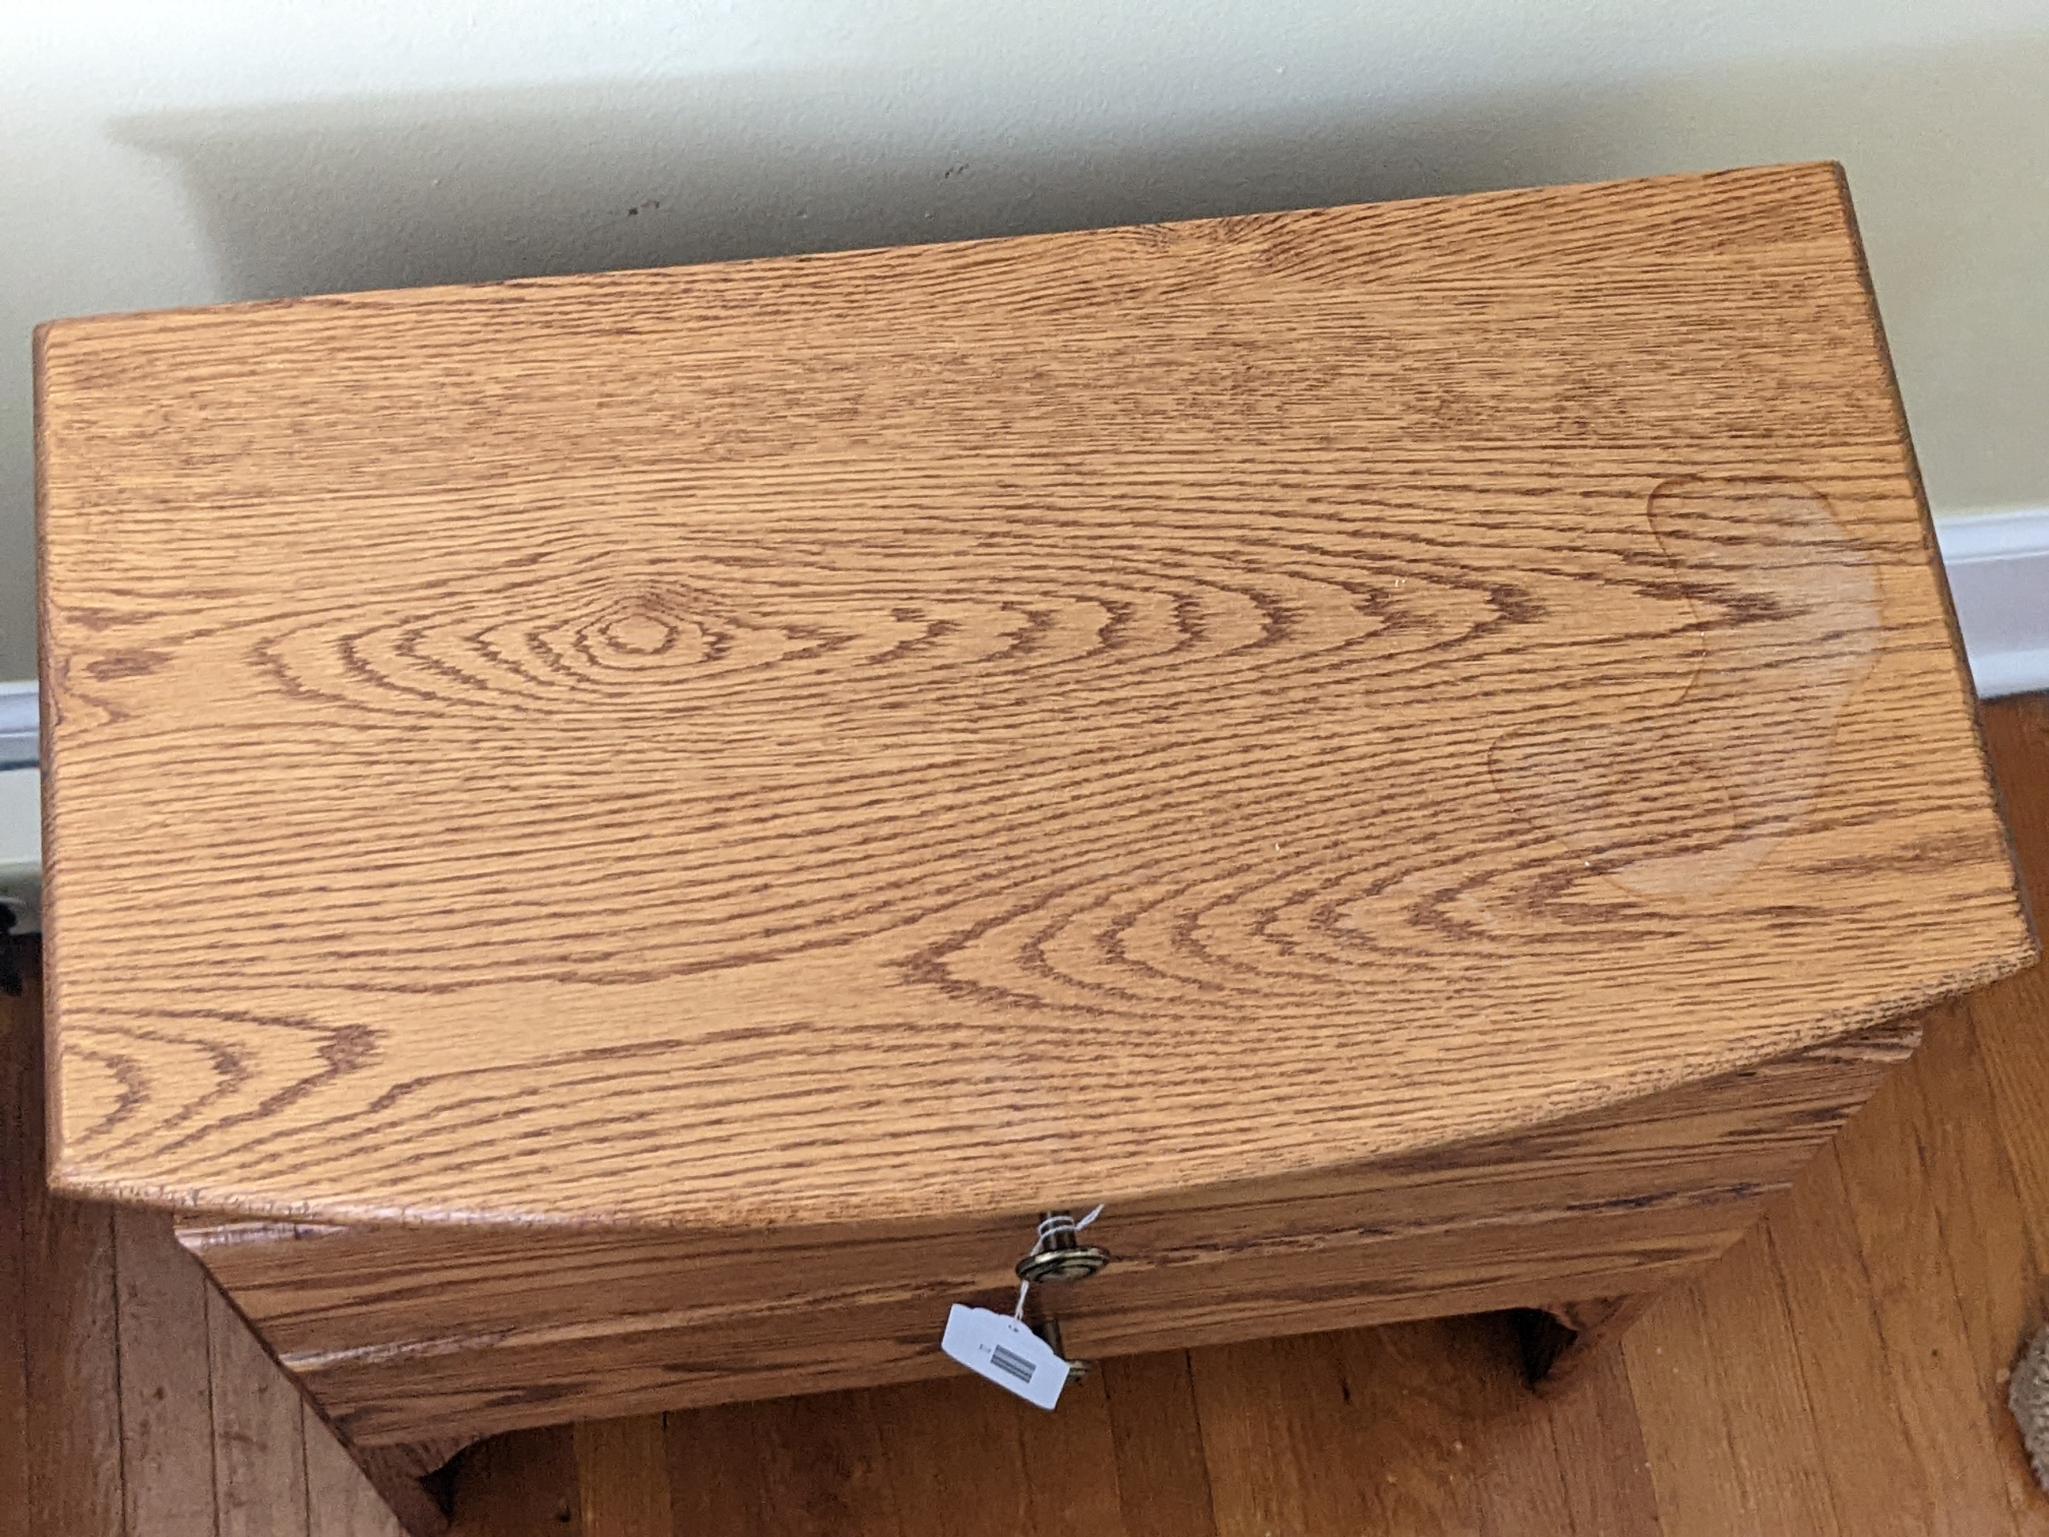 Sweet little nightstand is about 21" x 12" x 23" tall. Faint water mark noted on top, overall good